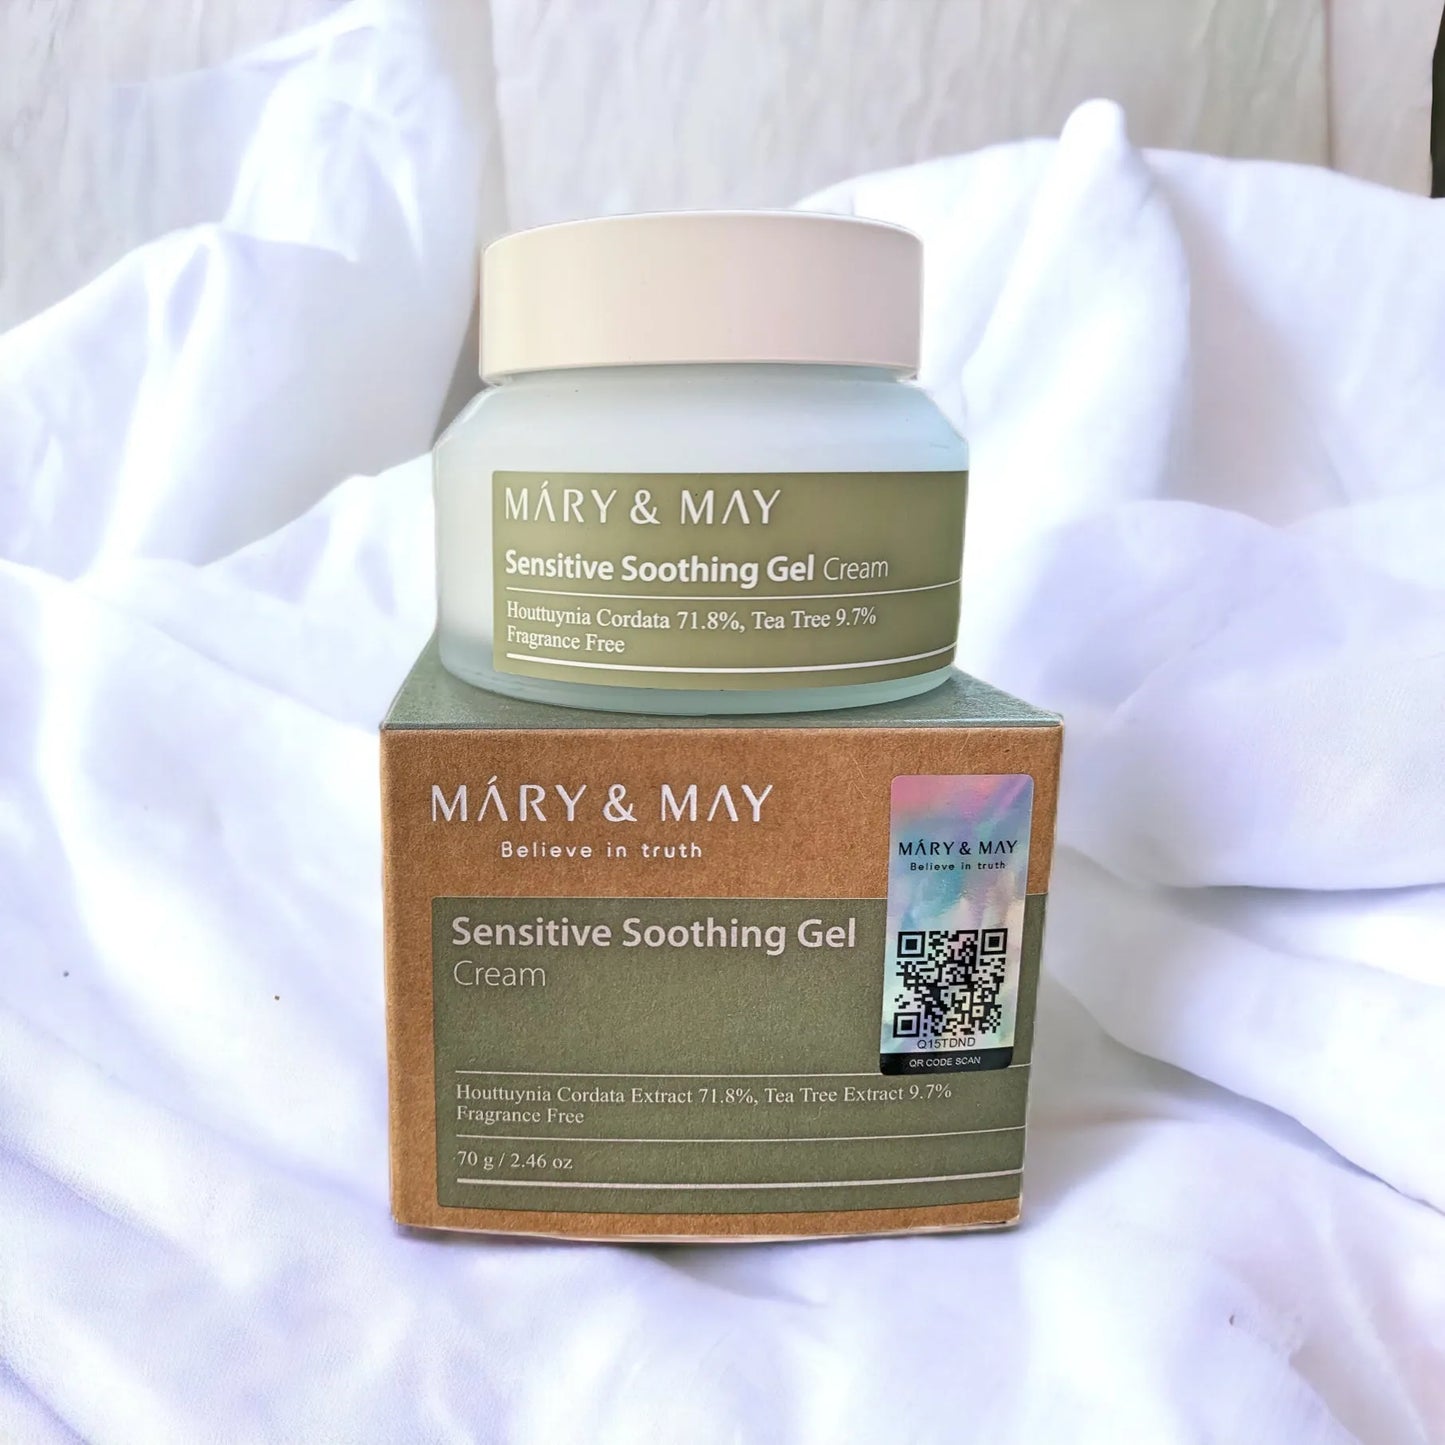 MARY & MAY  Sensitive Soothing Gel Blemish Cream 70g